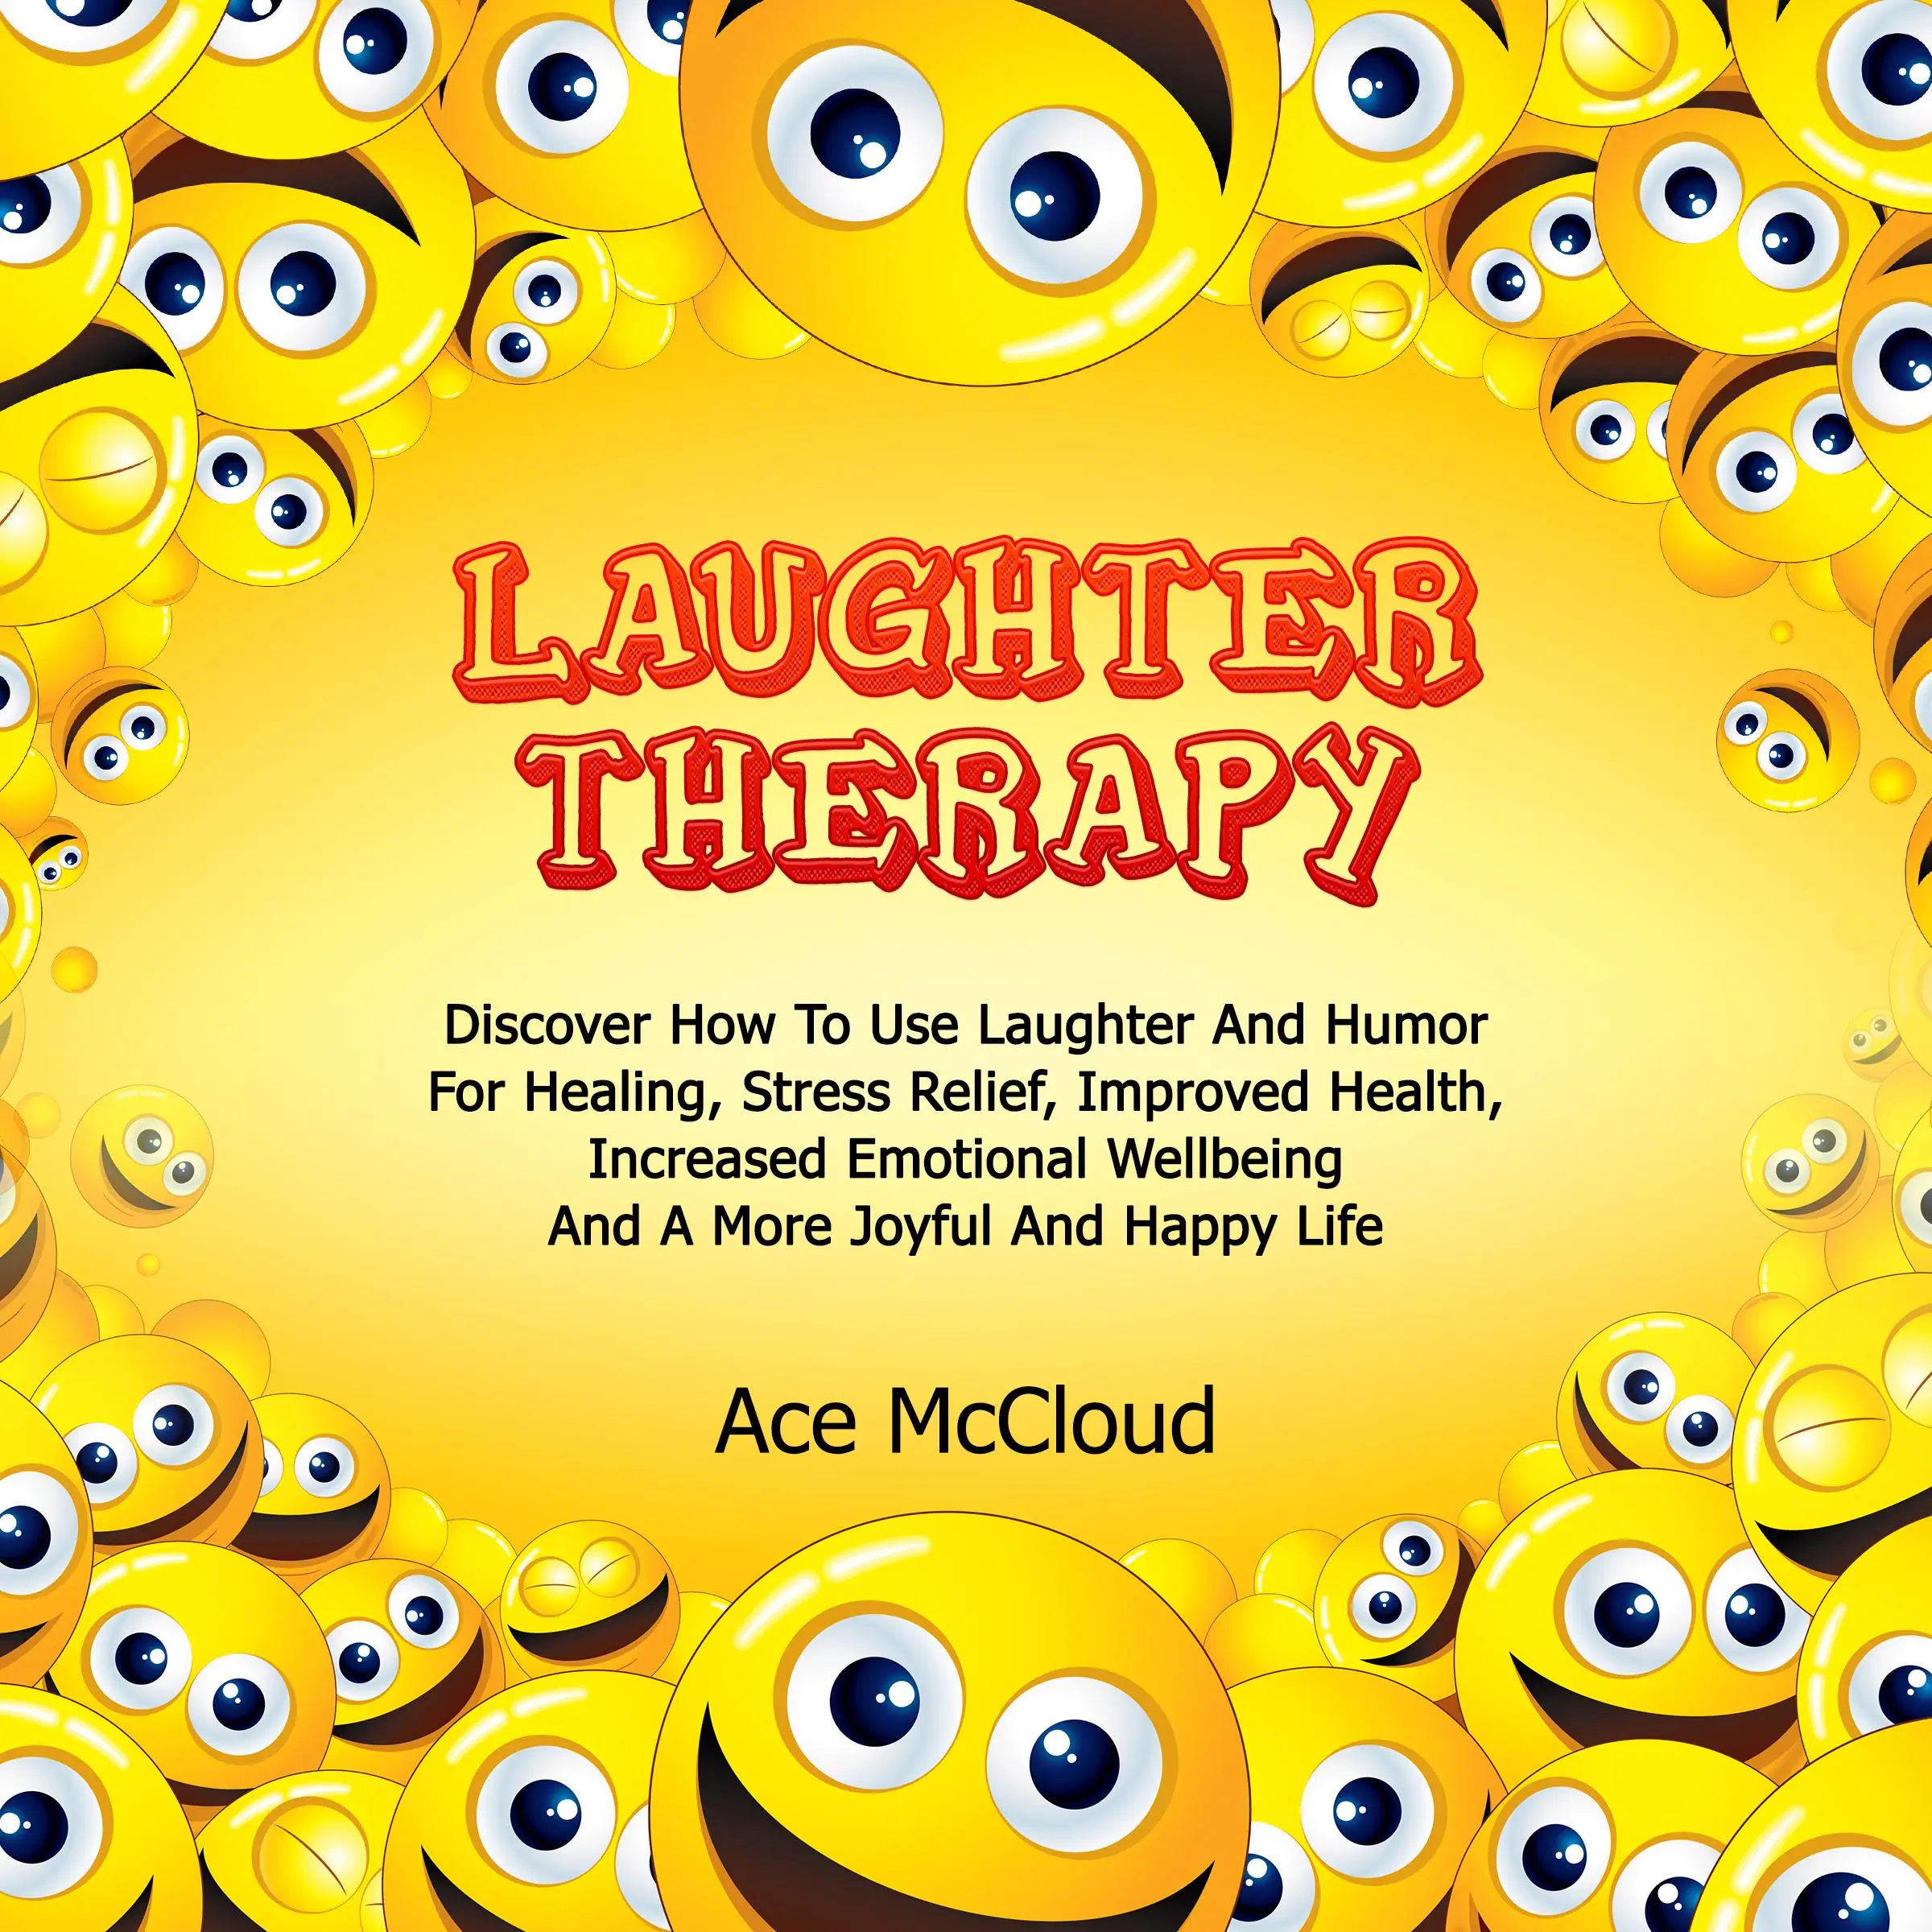 Laughter Therapy: Discover How To Use Laughter And Humor For Healing, Stress Relief, Improved Health, Increased Emotional Wellbeing And A More Joyful And Happy Life by Ace McCloud Audiobook